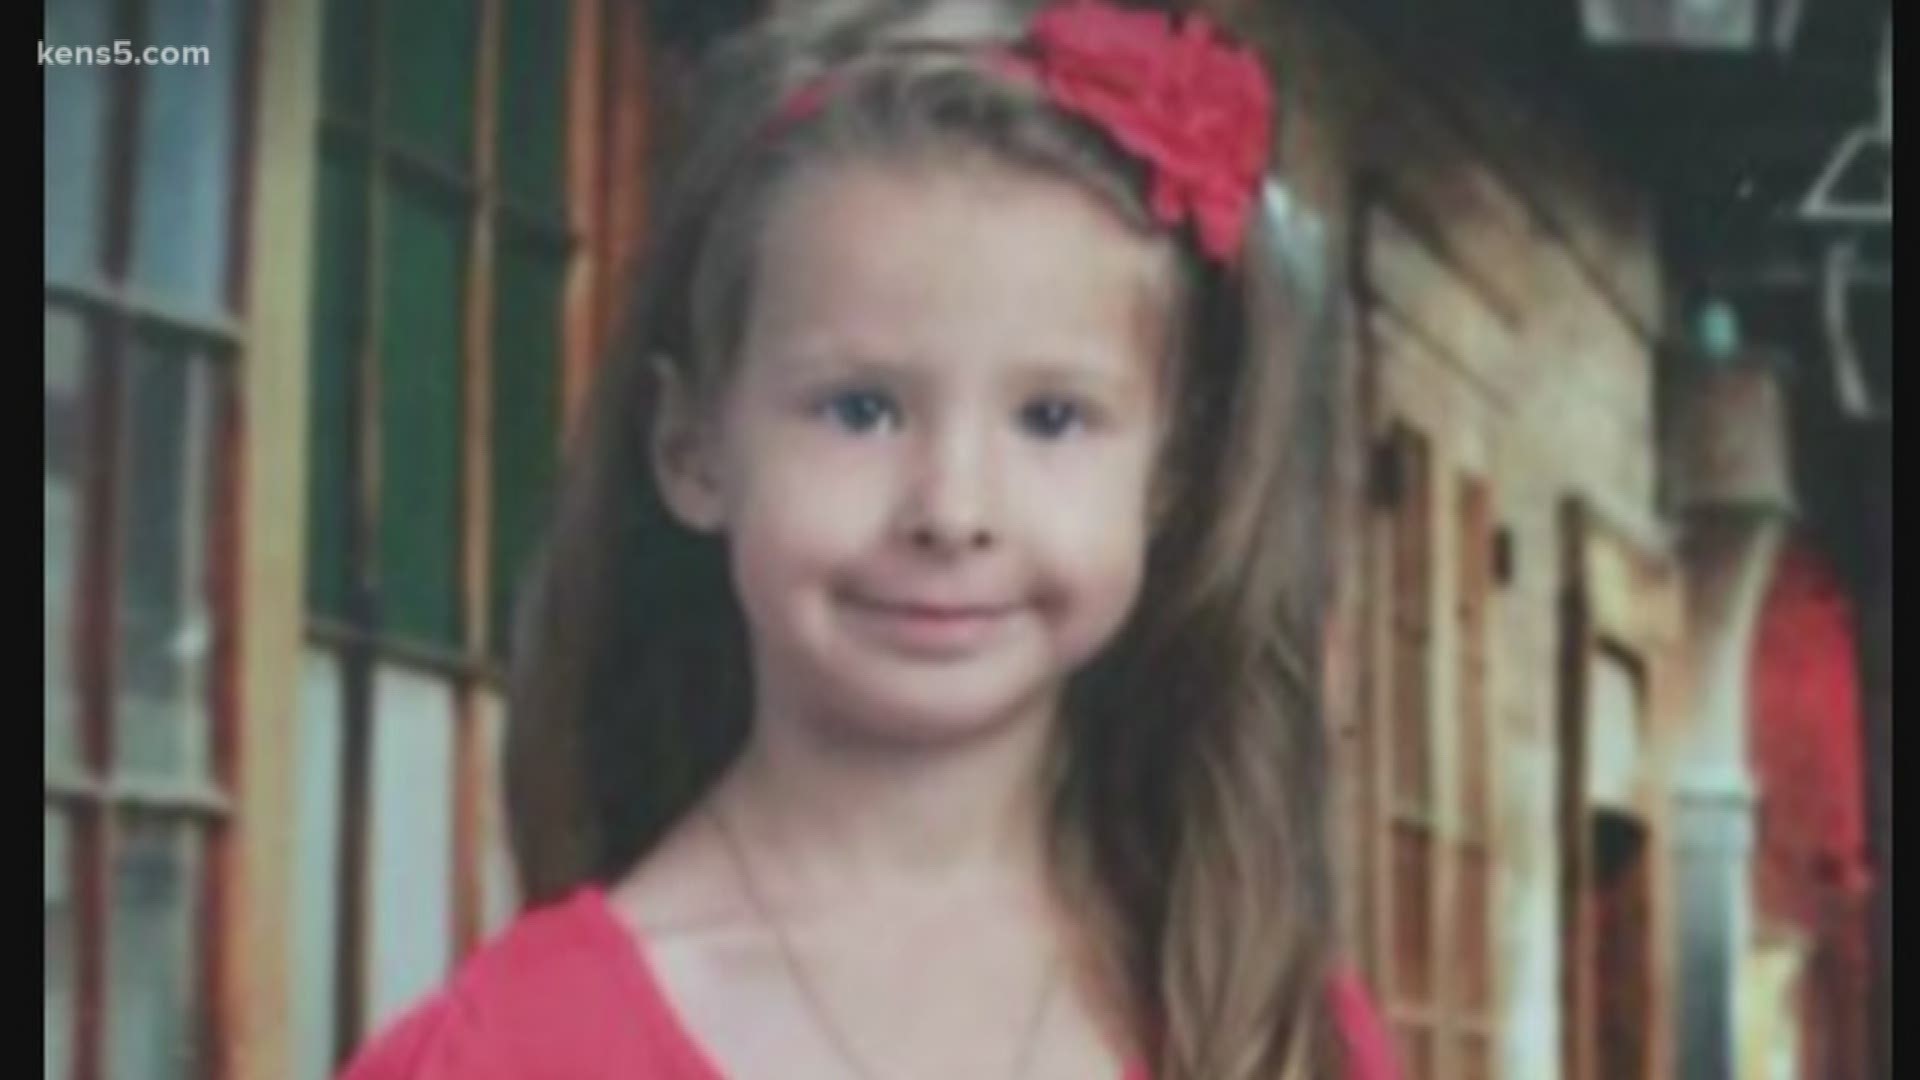 Nearly three years ago, now-9-year-old Ava Grace Baldwin disappeared. Today, her father is still looking for her and her mother, a fugitive from the law.